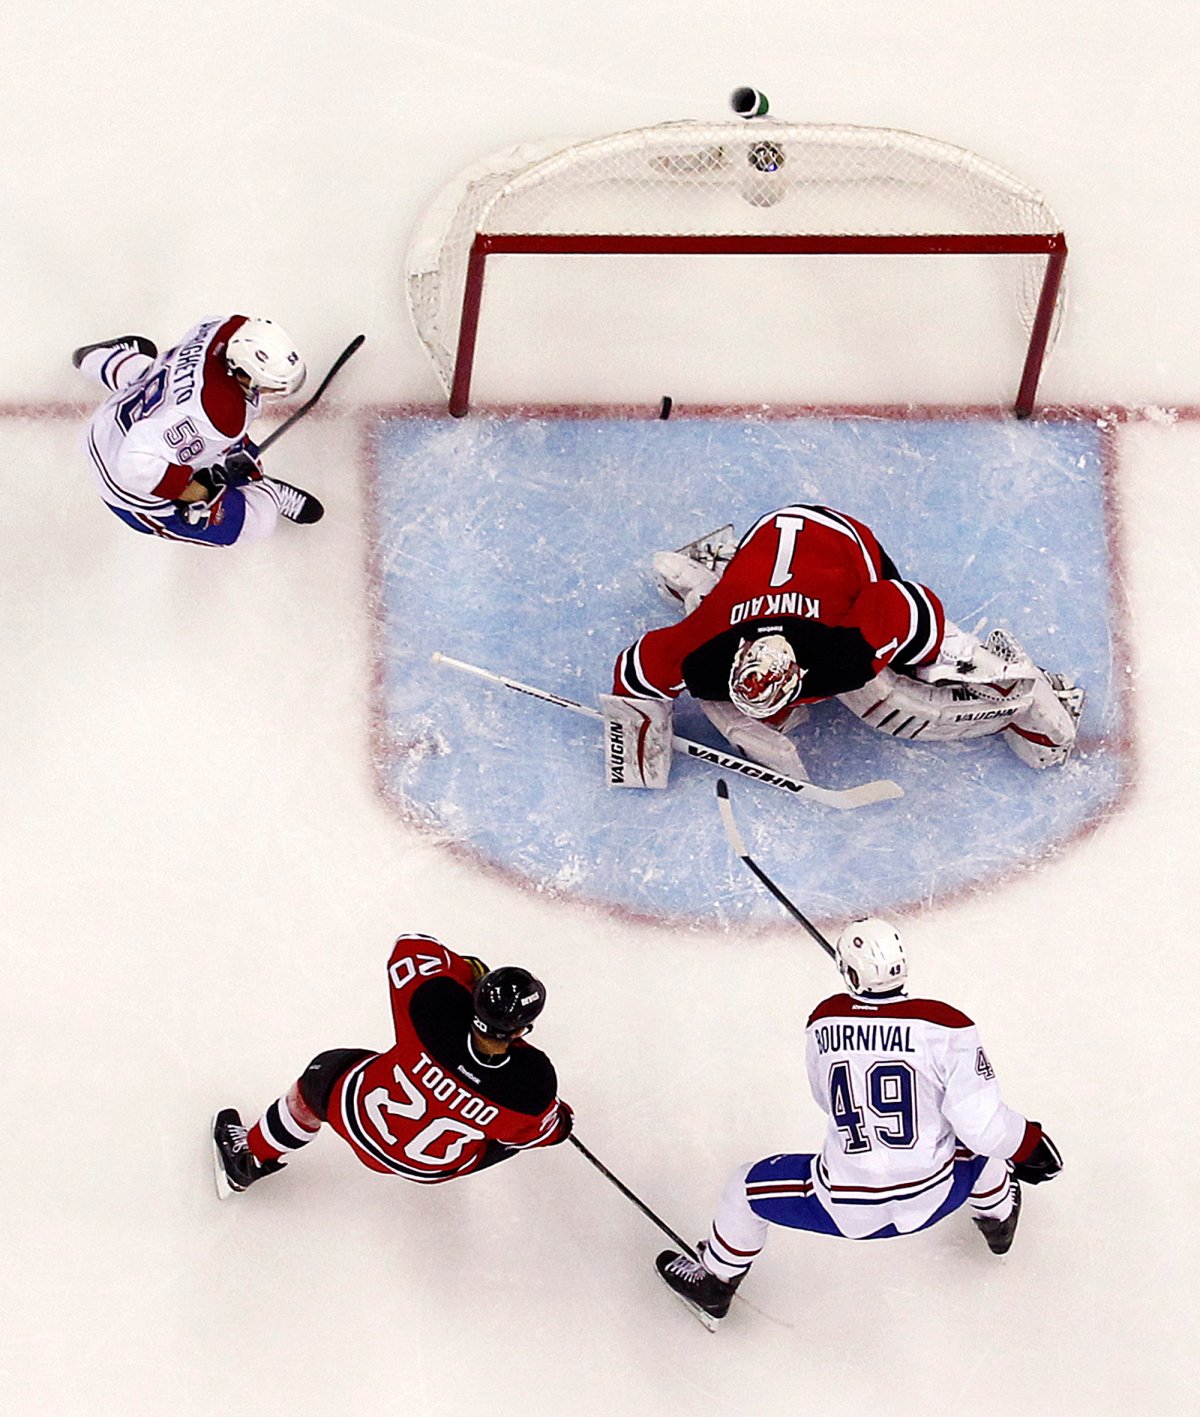 Montreal Canadiens left wing Michael Bournival (49) scores a goal on New Jersey Devils goalkeeper Keith Kinkaid (1) during the third period of an NHL hockey game, Friday, Jan. 2, 2015, in Newark, N.J.